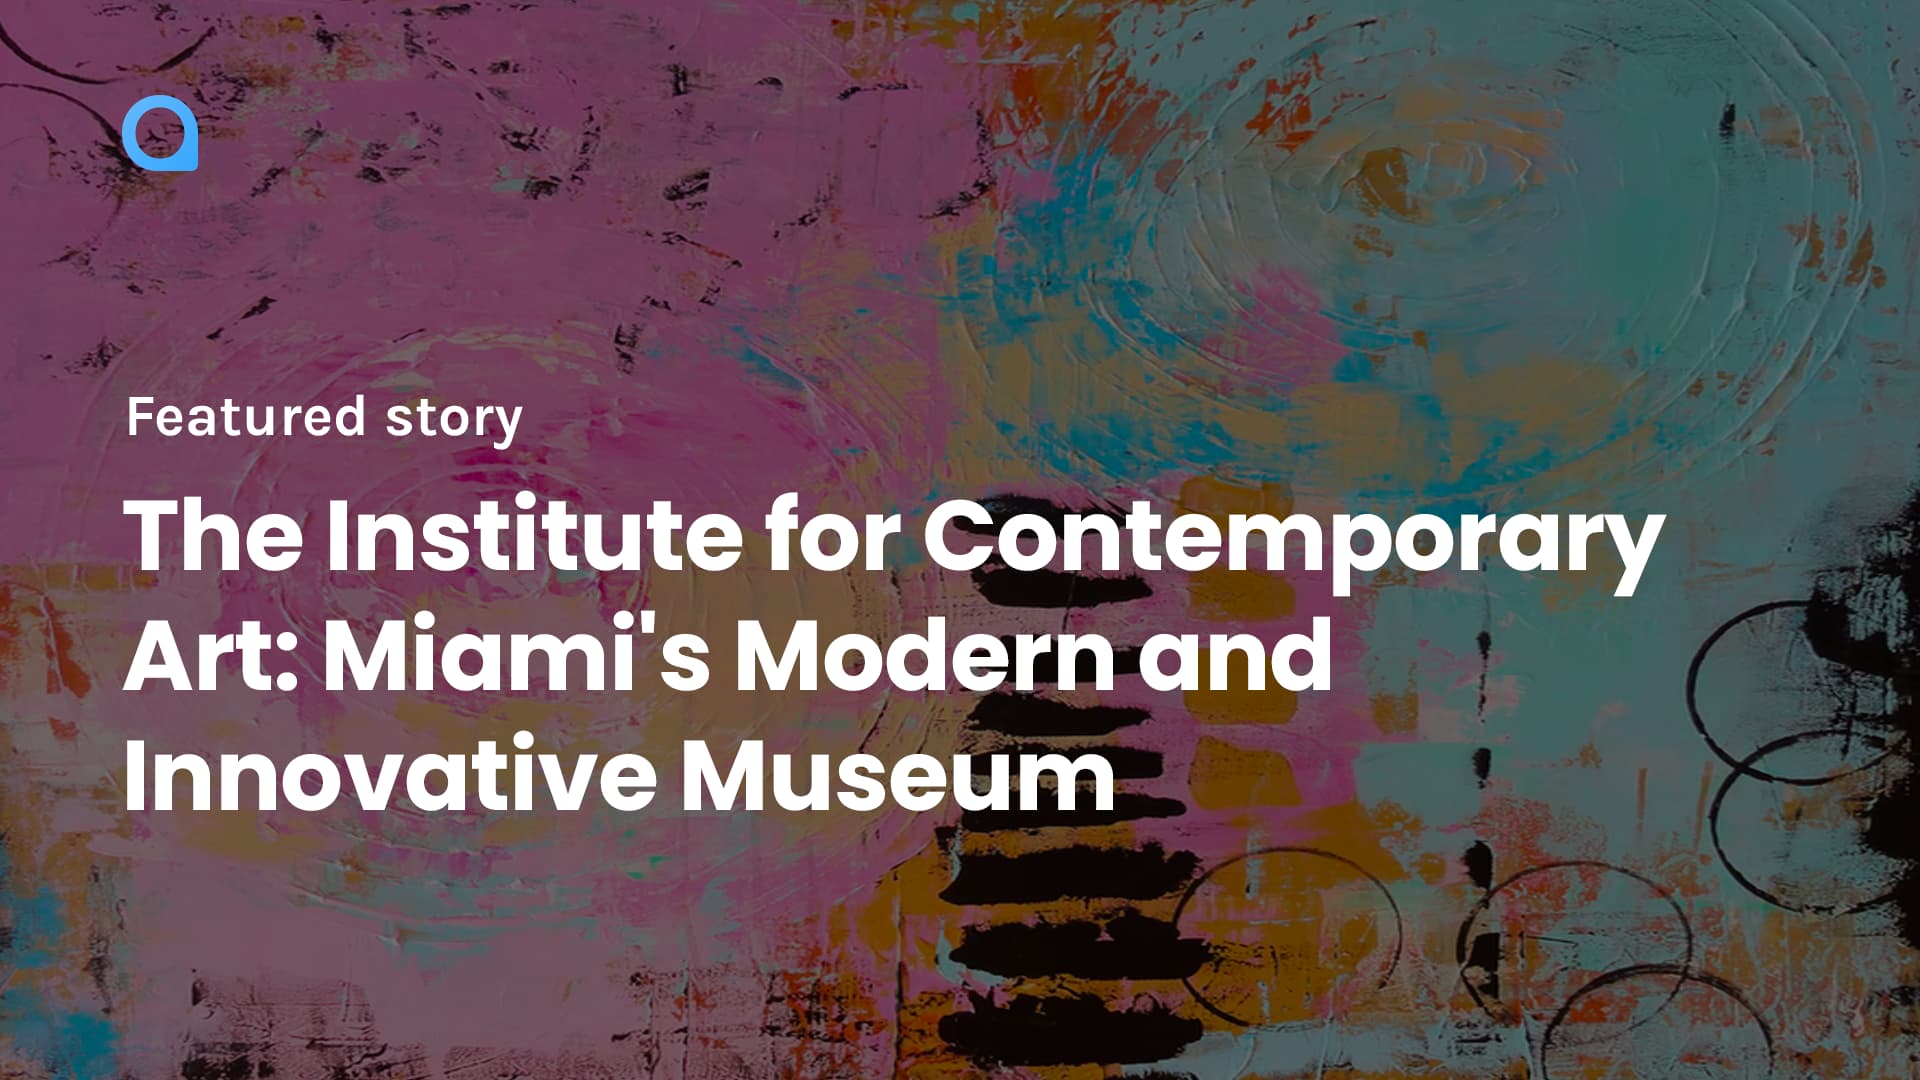 The Institute for Contemporary Art: Miami's Modern and Innovative Museum